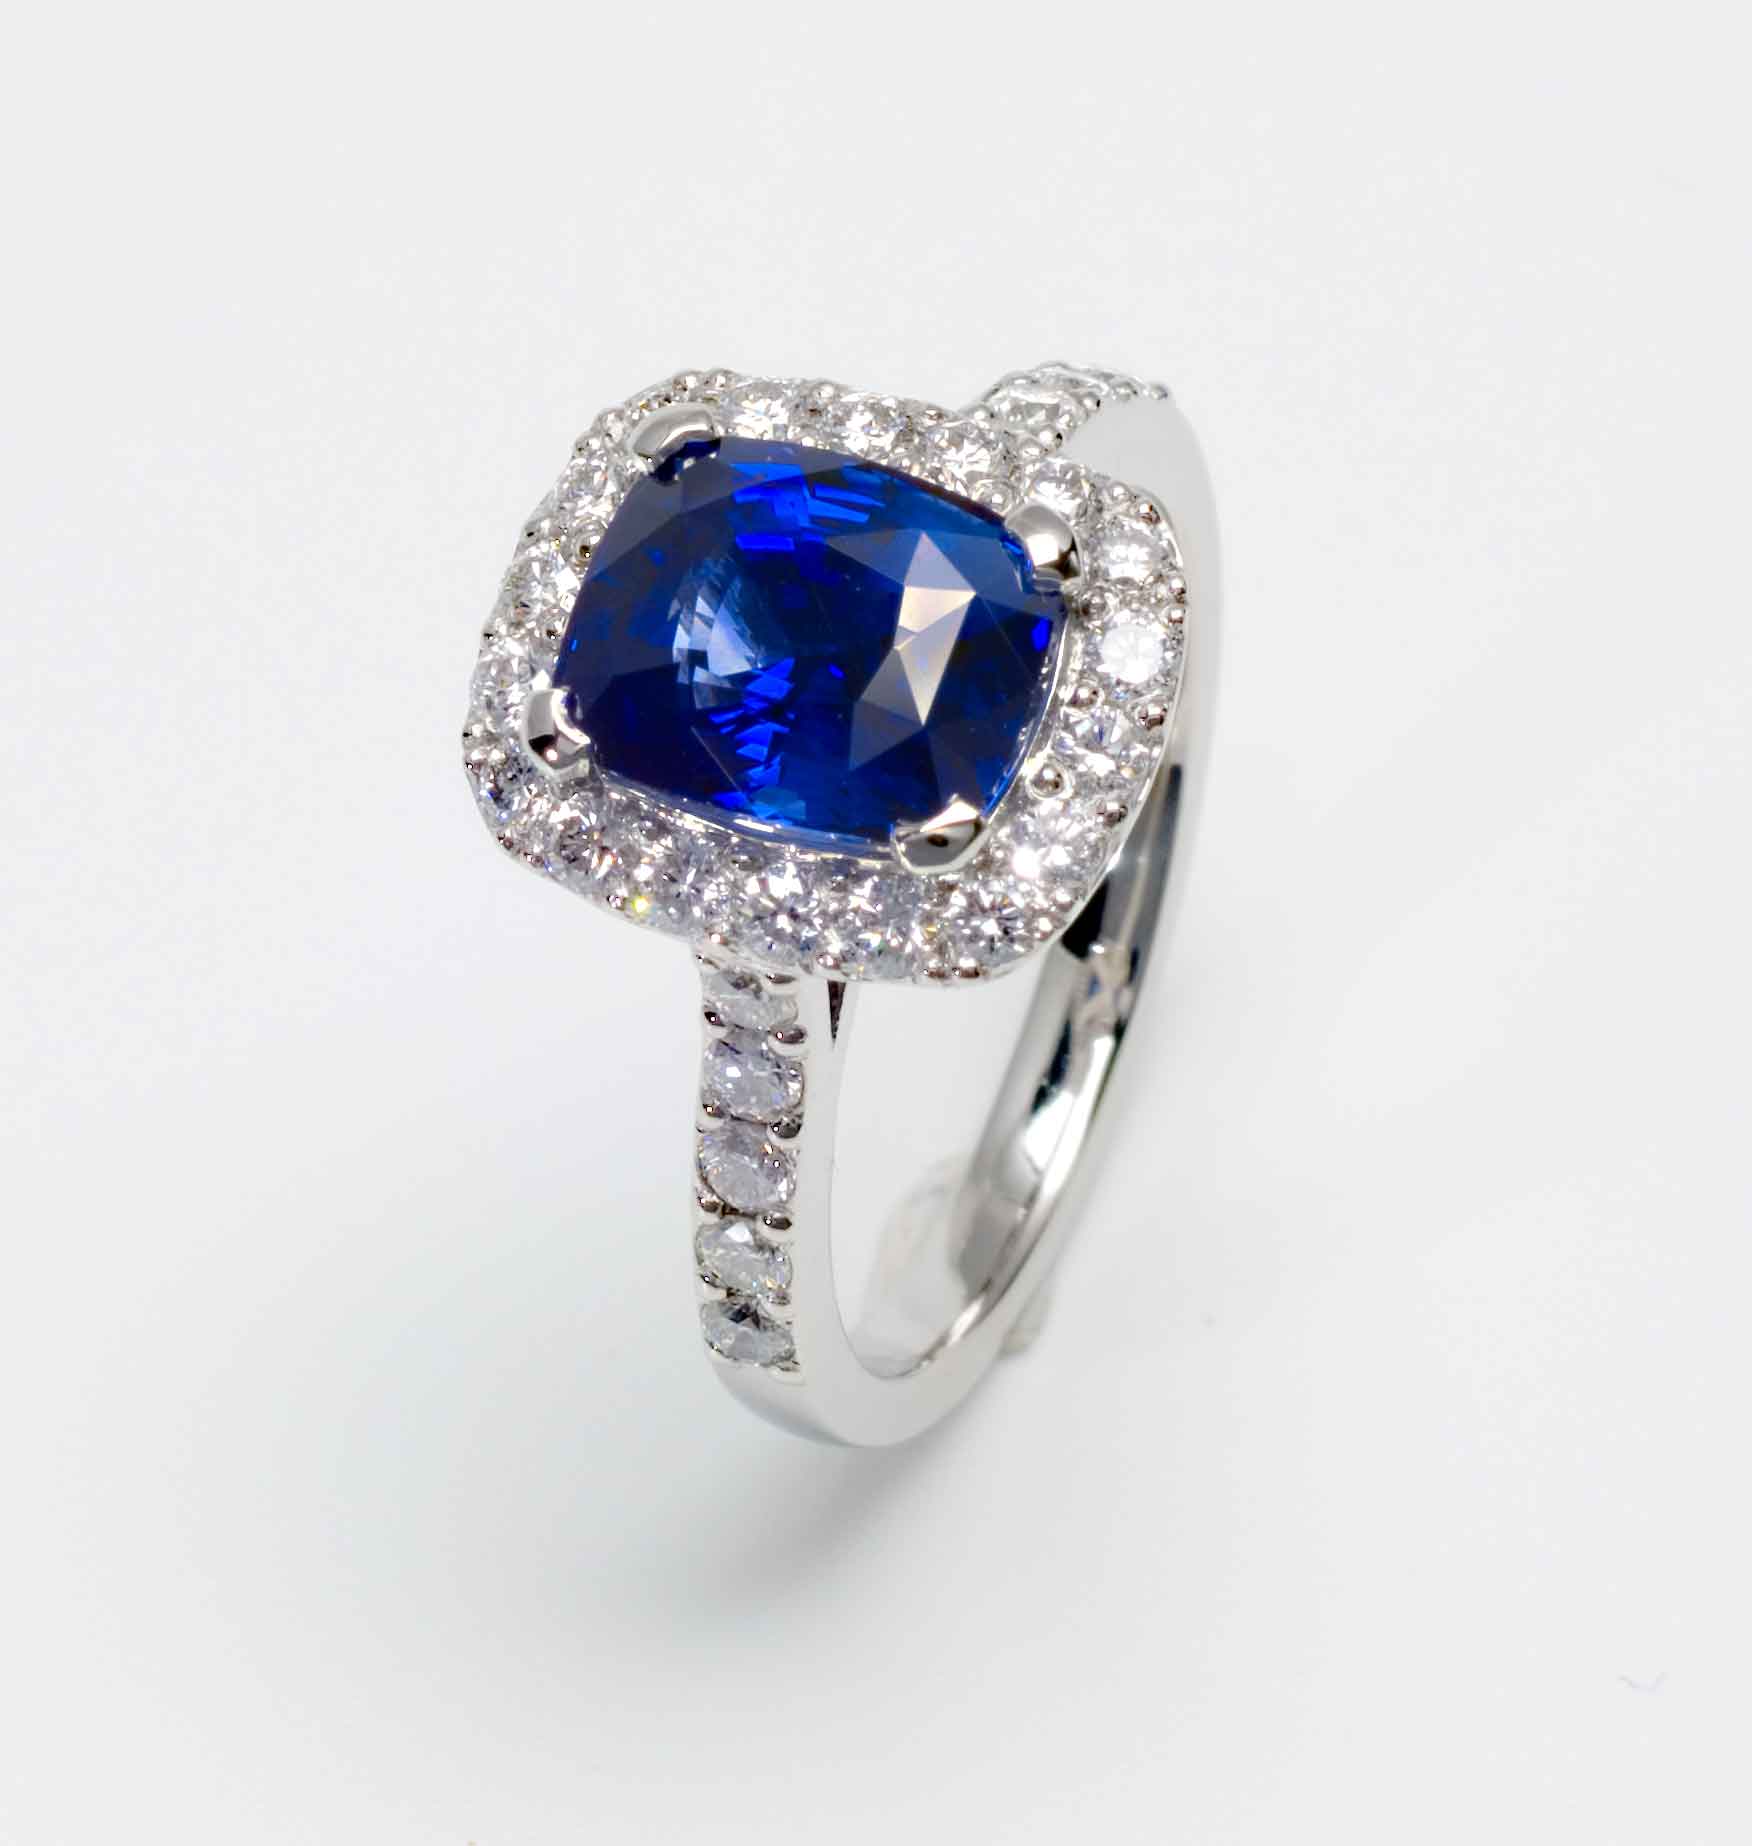 Blue sapphire cushion and diamond engagement ring